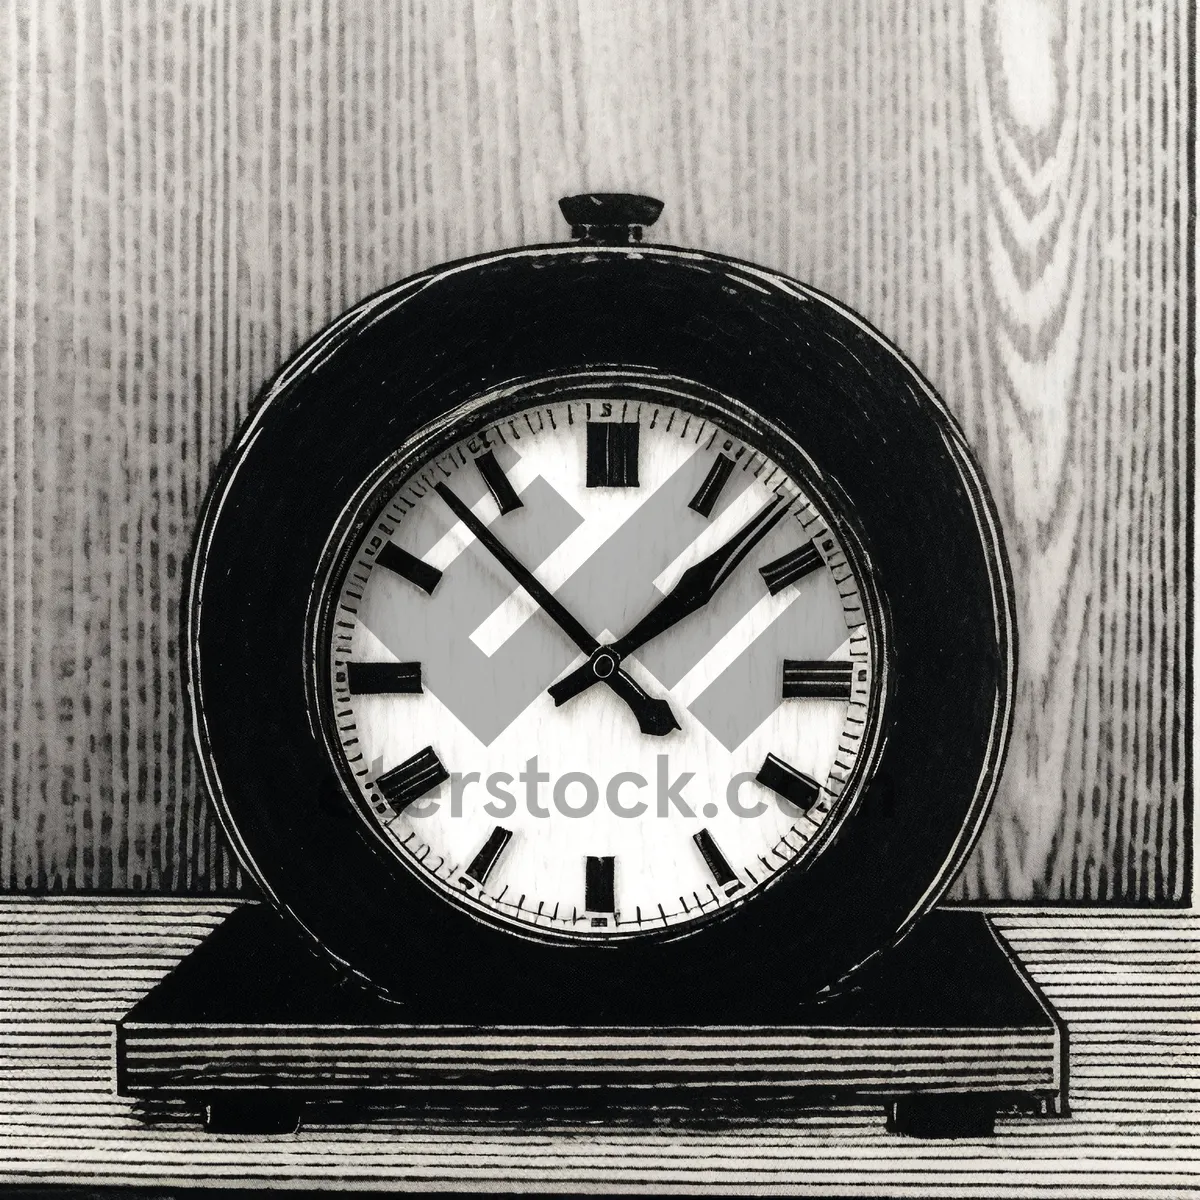 Picture of Antique Wall Clock: Classic Timepiece for Timekeepers.